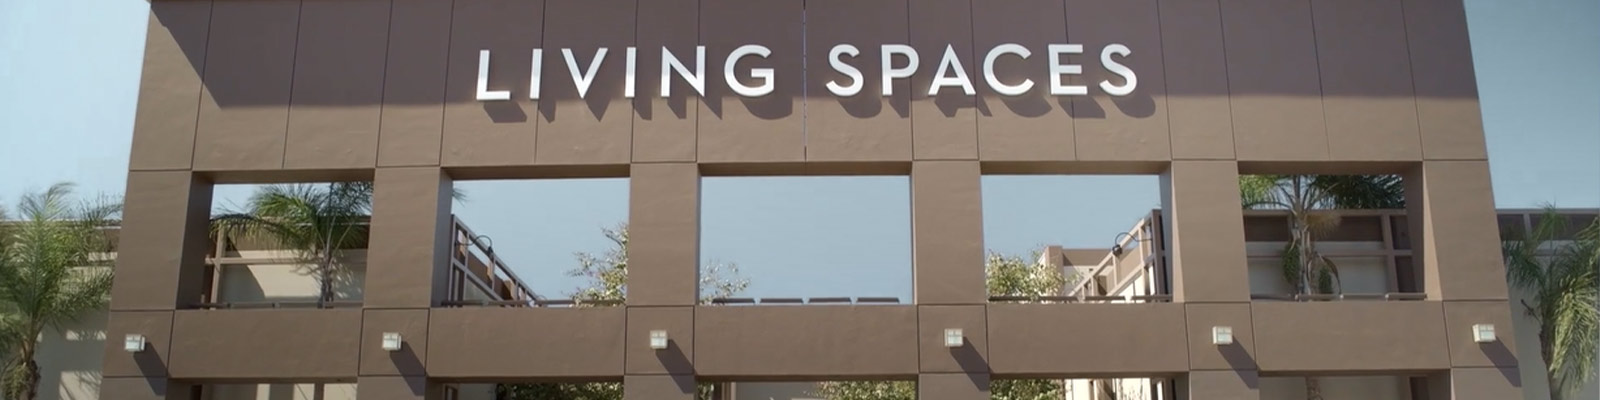 Living spaces building